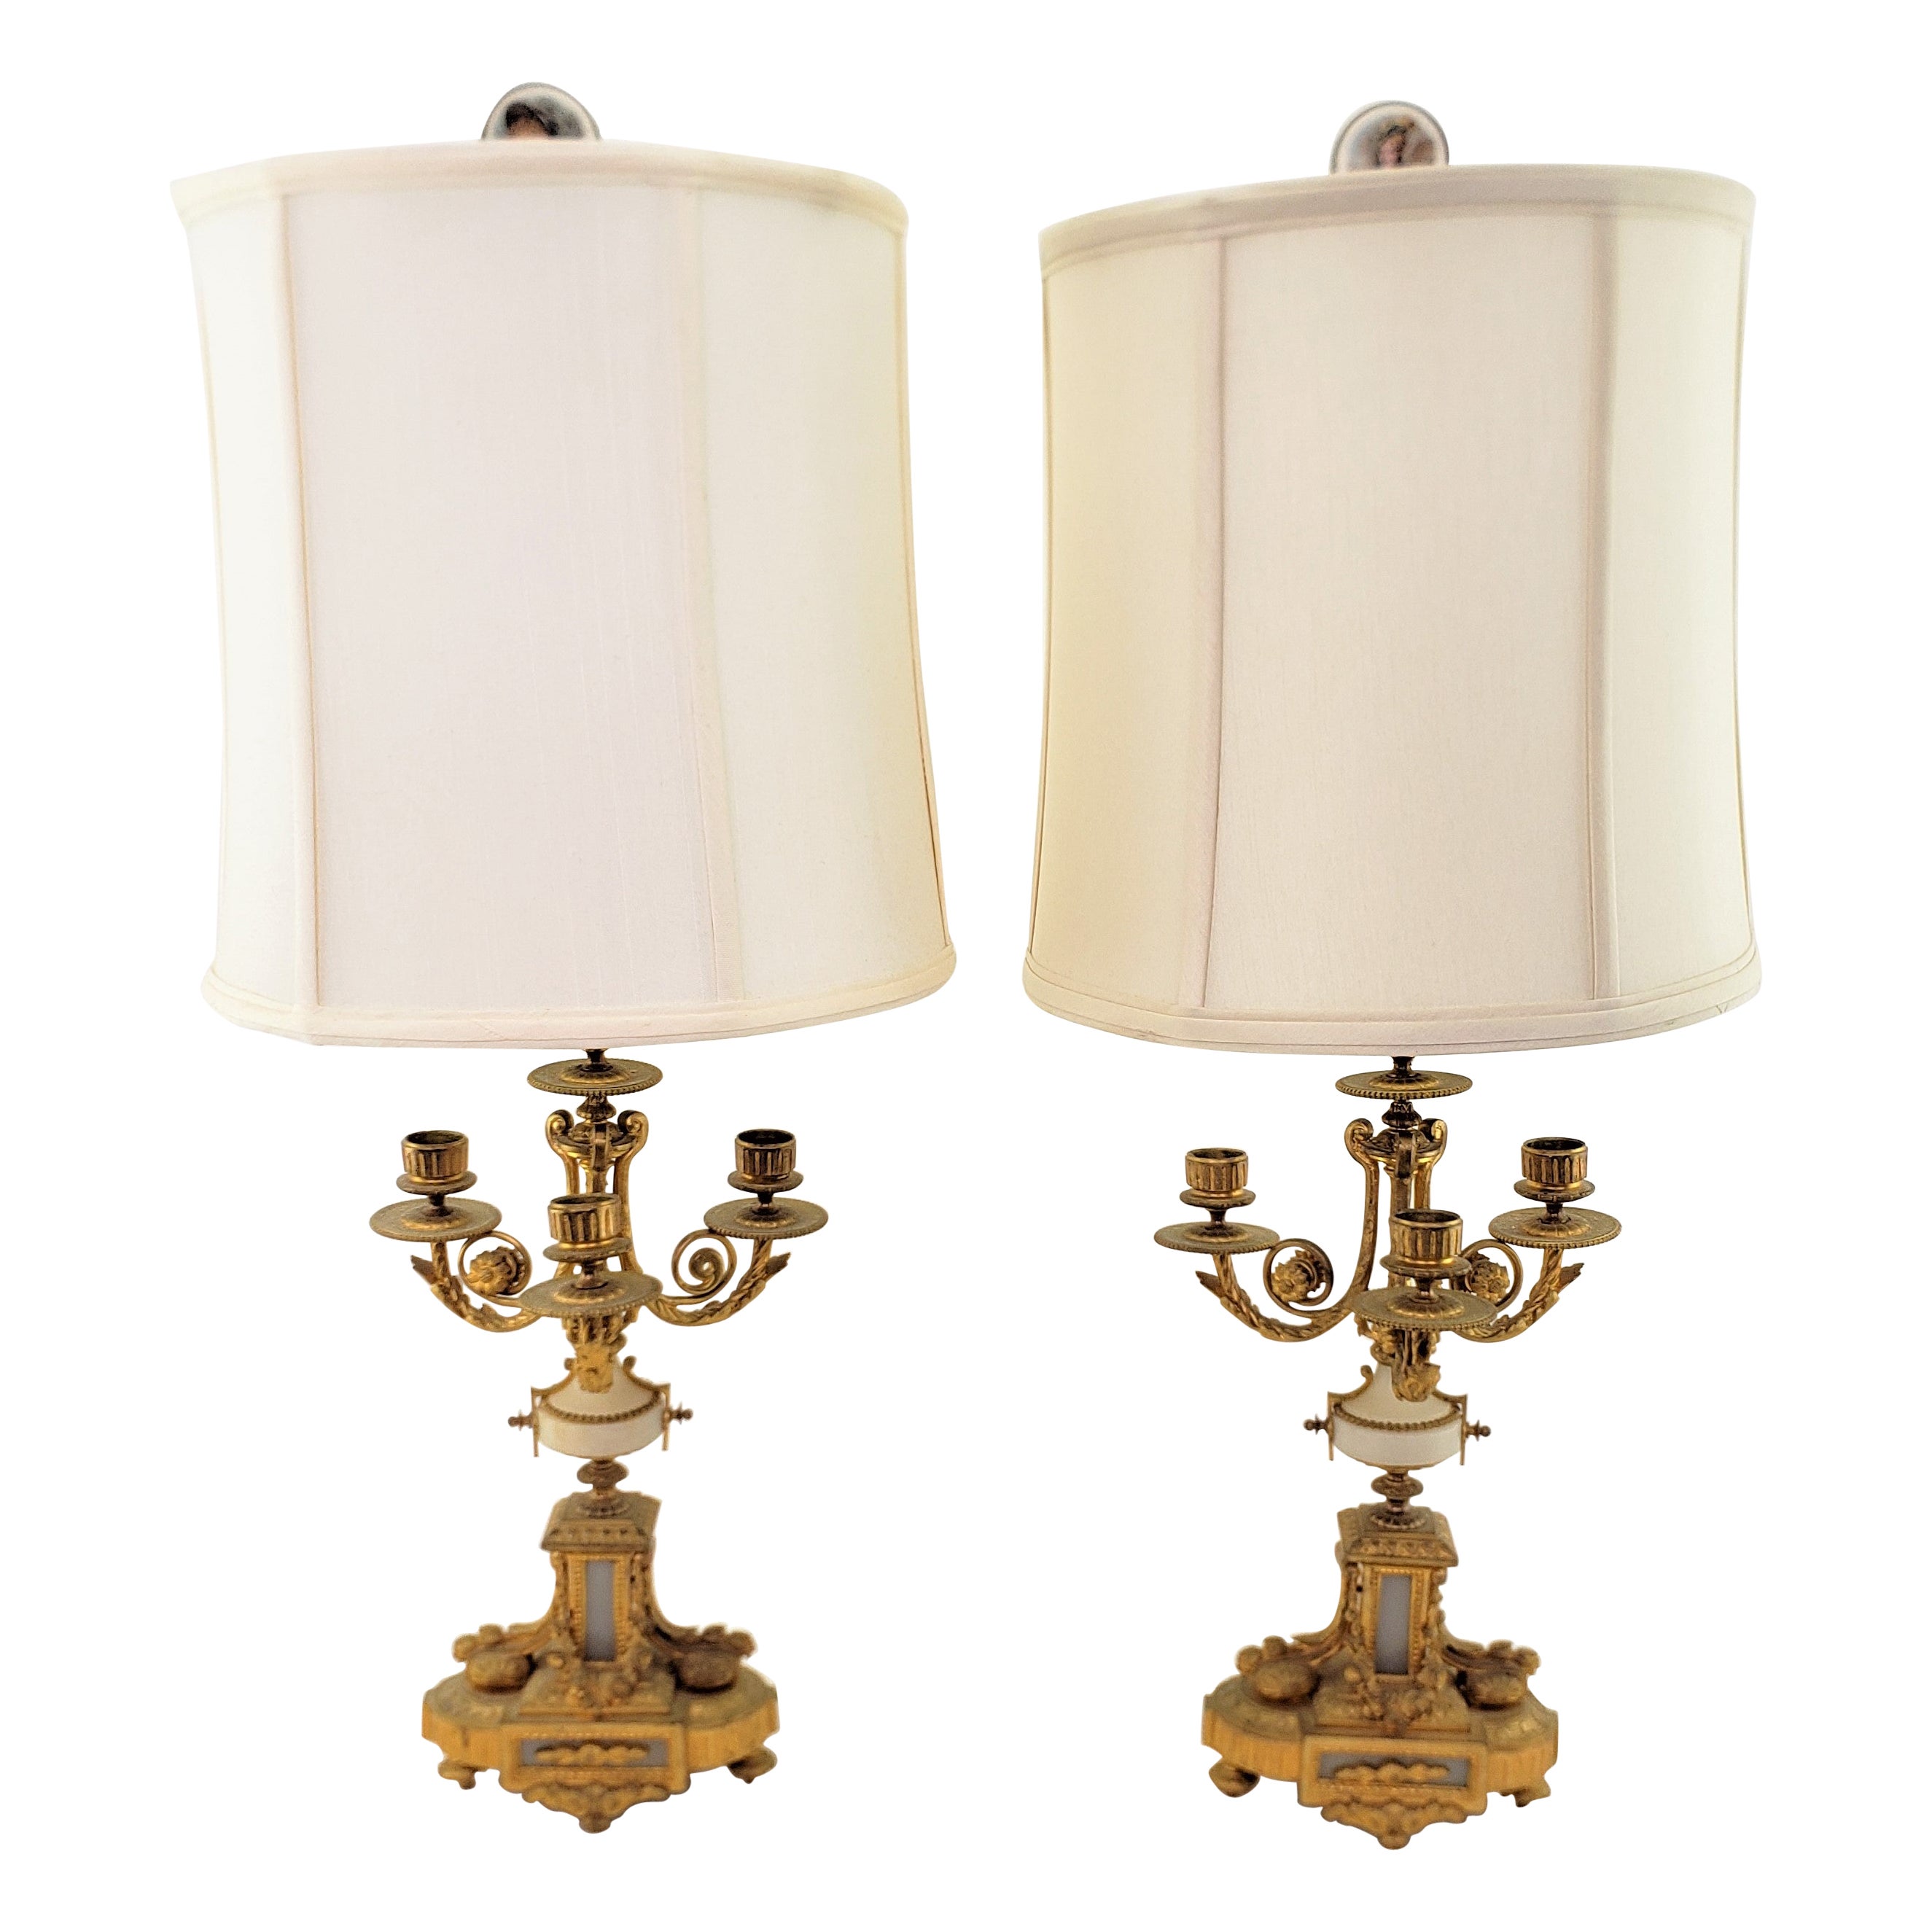 Pair of Ornate Antique French Gilt Bronze Converted Candelabra Table Lamps